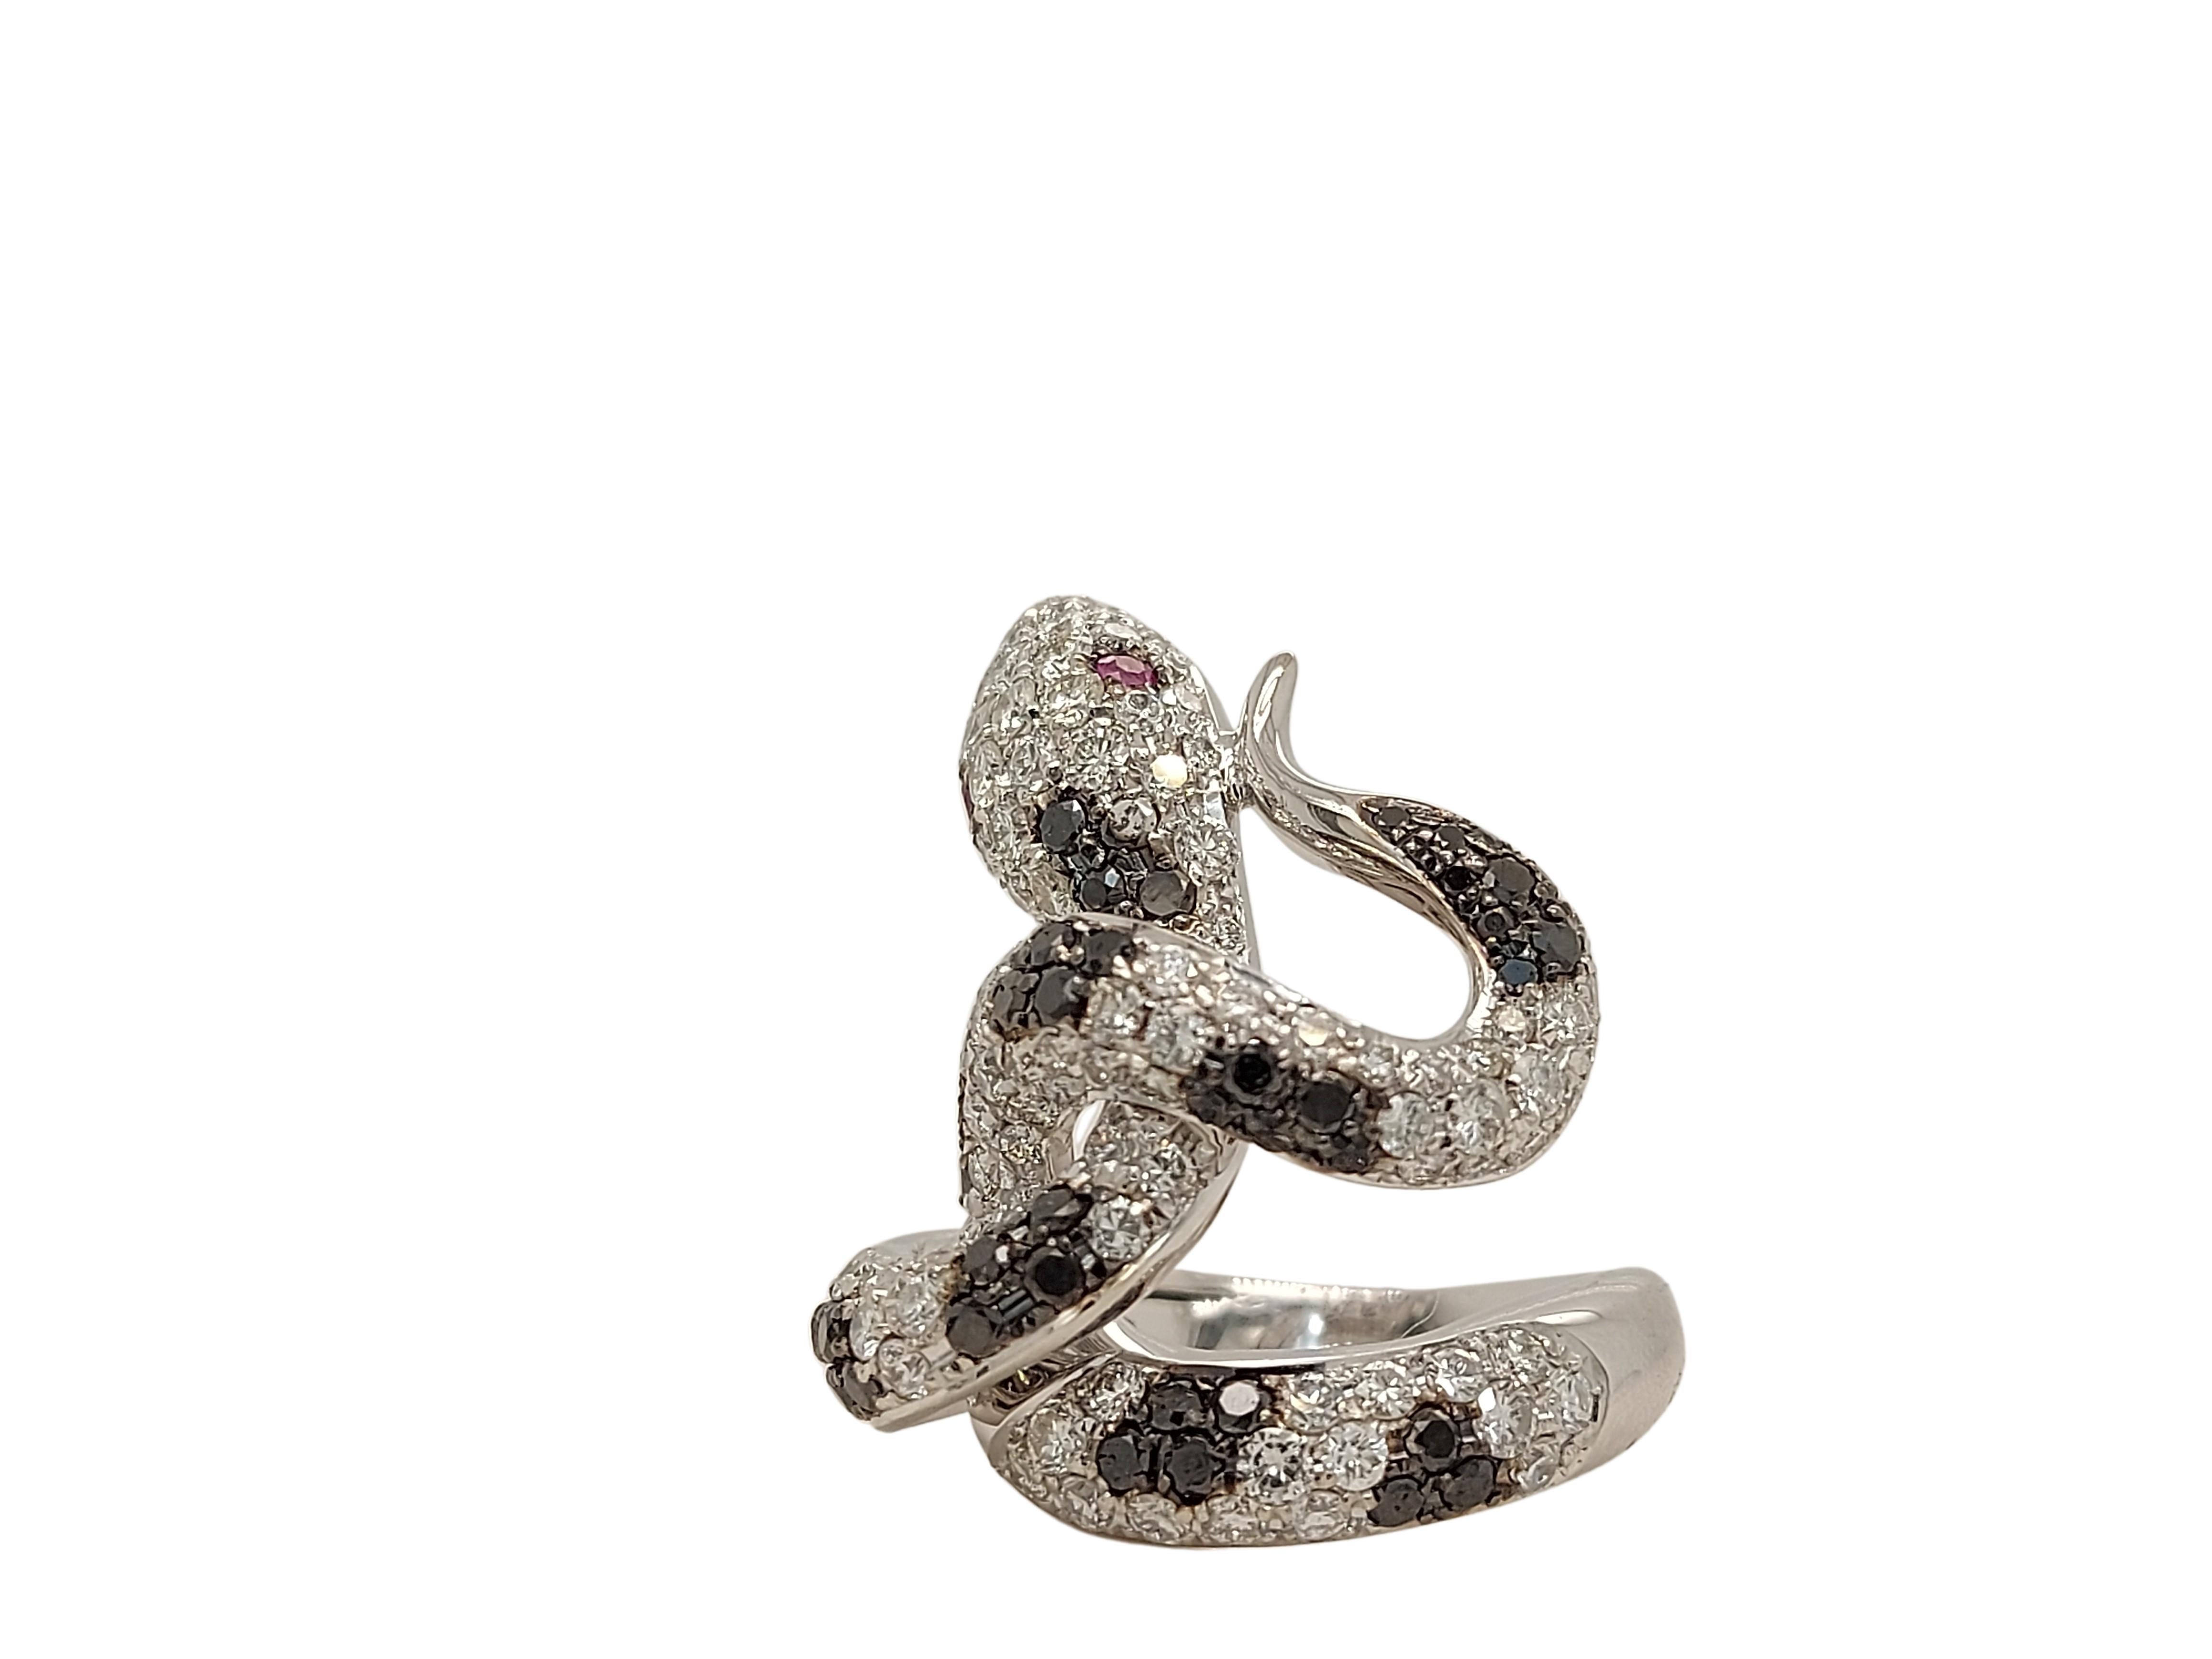 Amazing and Unique 18kt White Gold Snake Ring With 1.28ct Black and 2.83ct White Diamonds With 2 Ruby Eyes

Diamonds: 130 White brilliant cut diamonds, together ca. 2.83ct, 55 Black diamonds together ca. 1.28ct

Ruby: 2 Rubies for the eyes of the